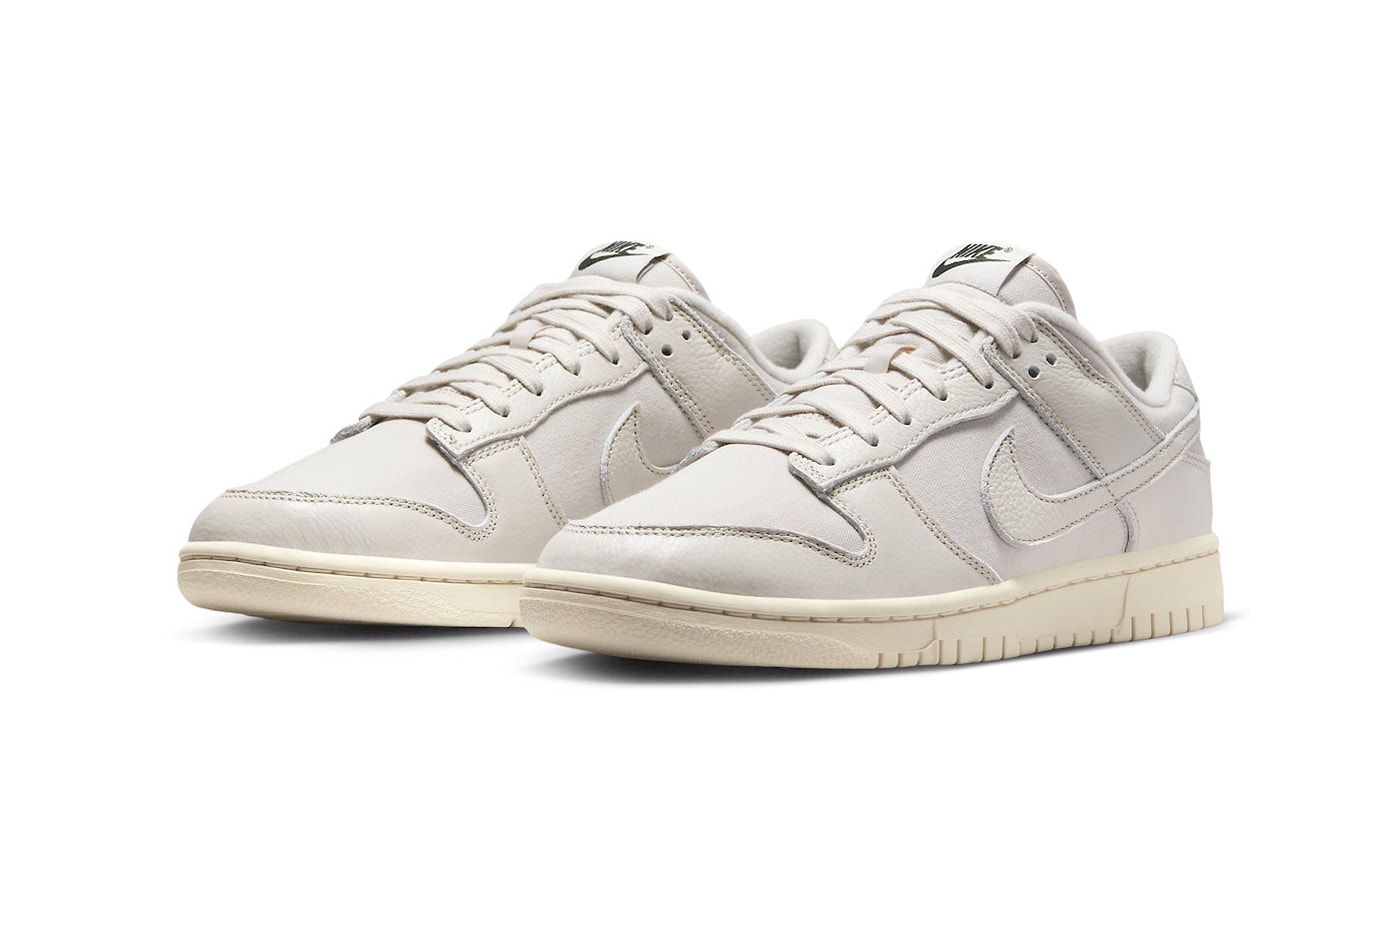 Nike Dunk Low "Light Orewood Brown" Has an Official Release Date Light Orewood Brown/Sequoia-Guava Ice DZ2538-100 swoosh low top sneaker